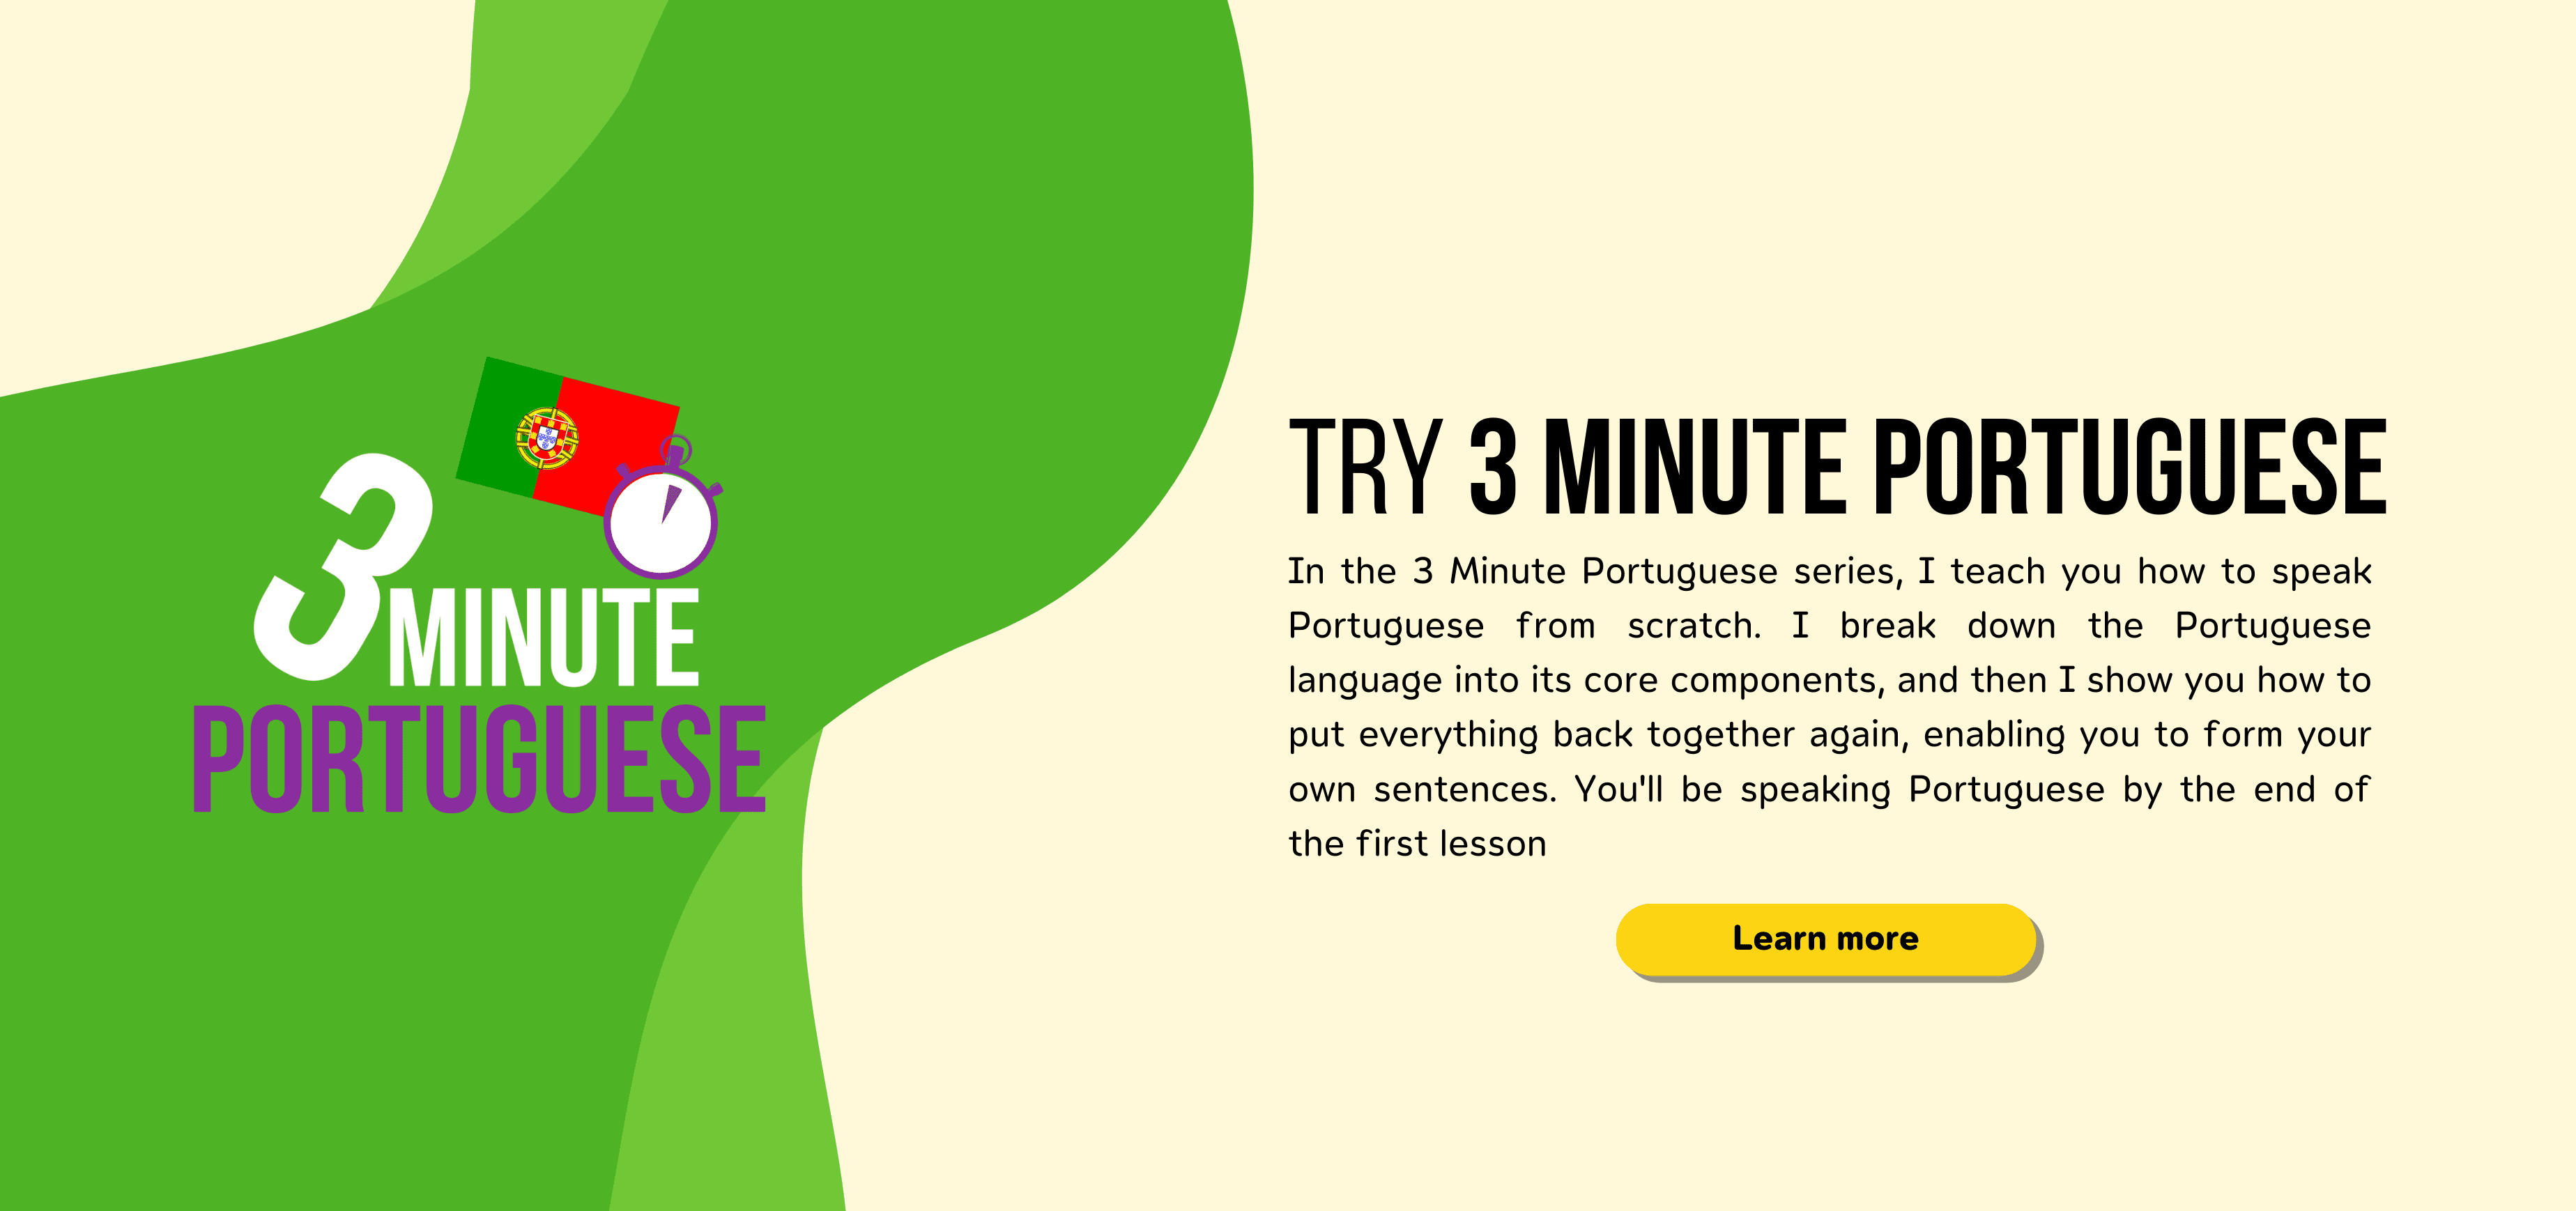 Try 3 Minute Portuguese